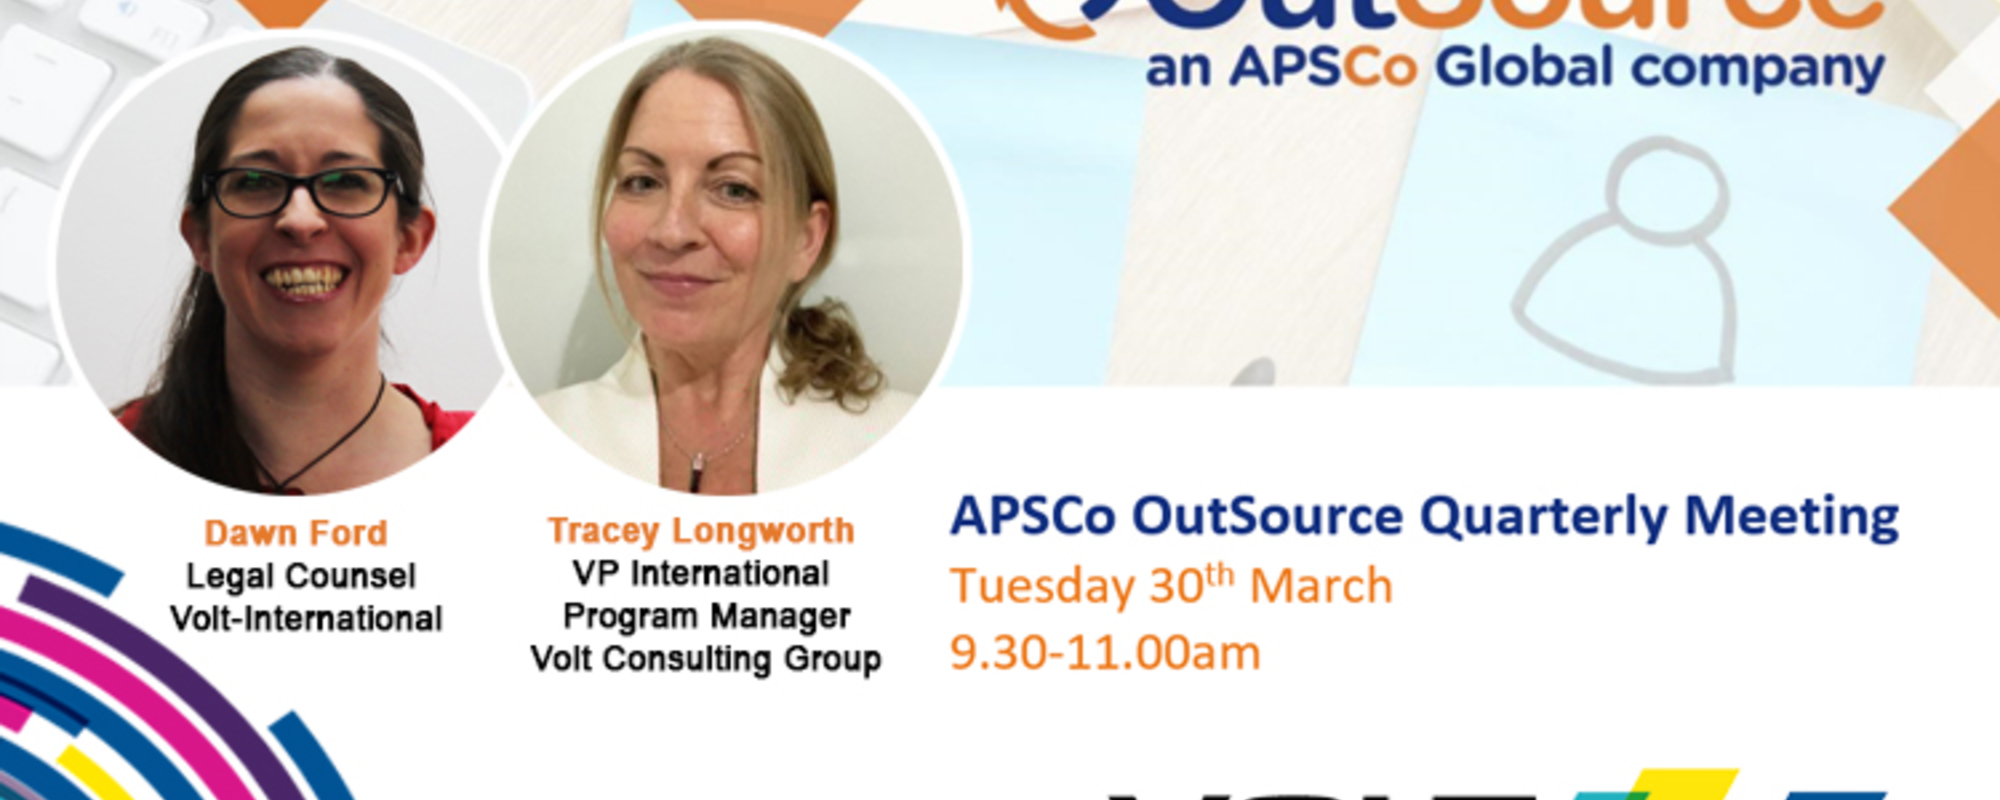 Apsco Out Source Quarterly Meeting March 2021